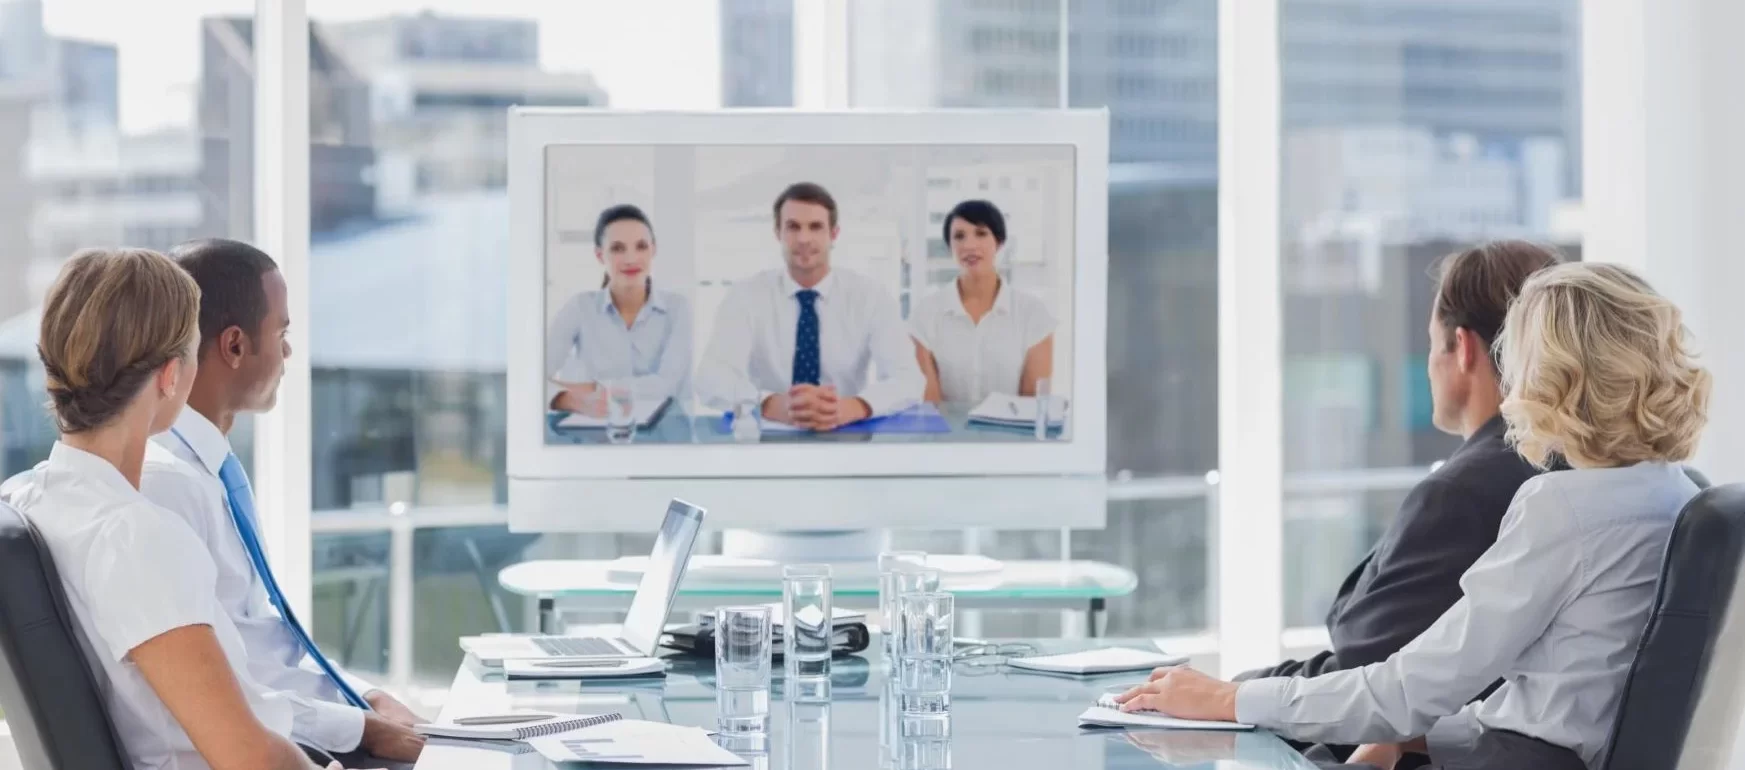 Business people conducting a video conference in a meeting room